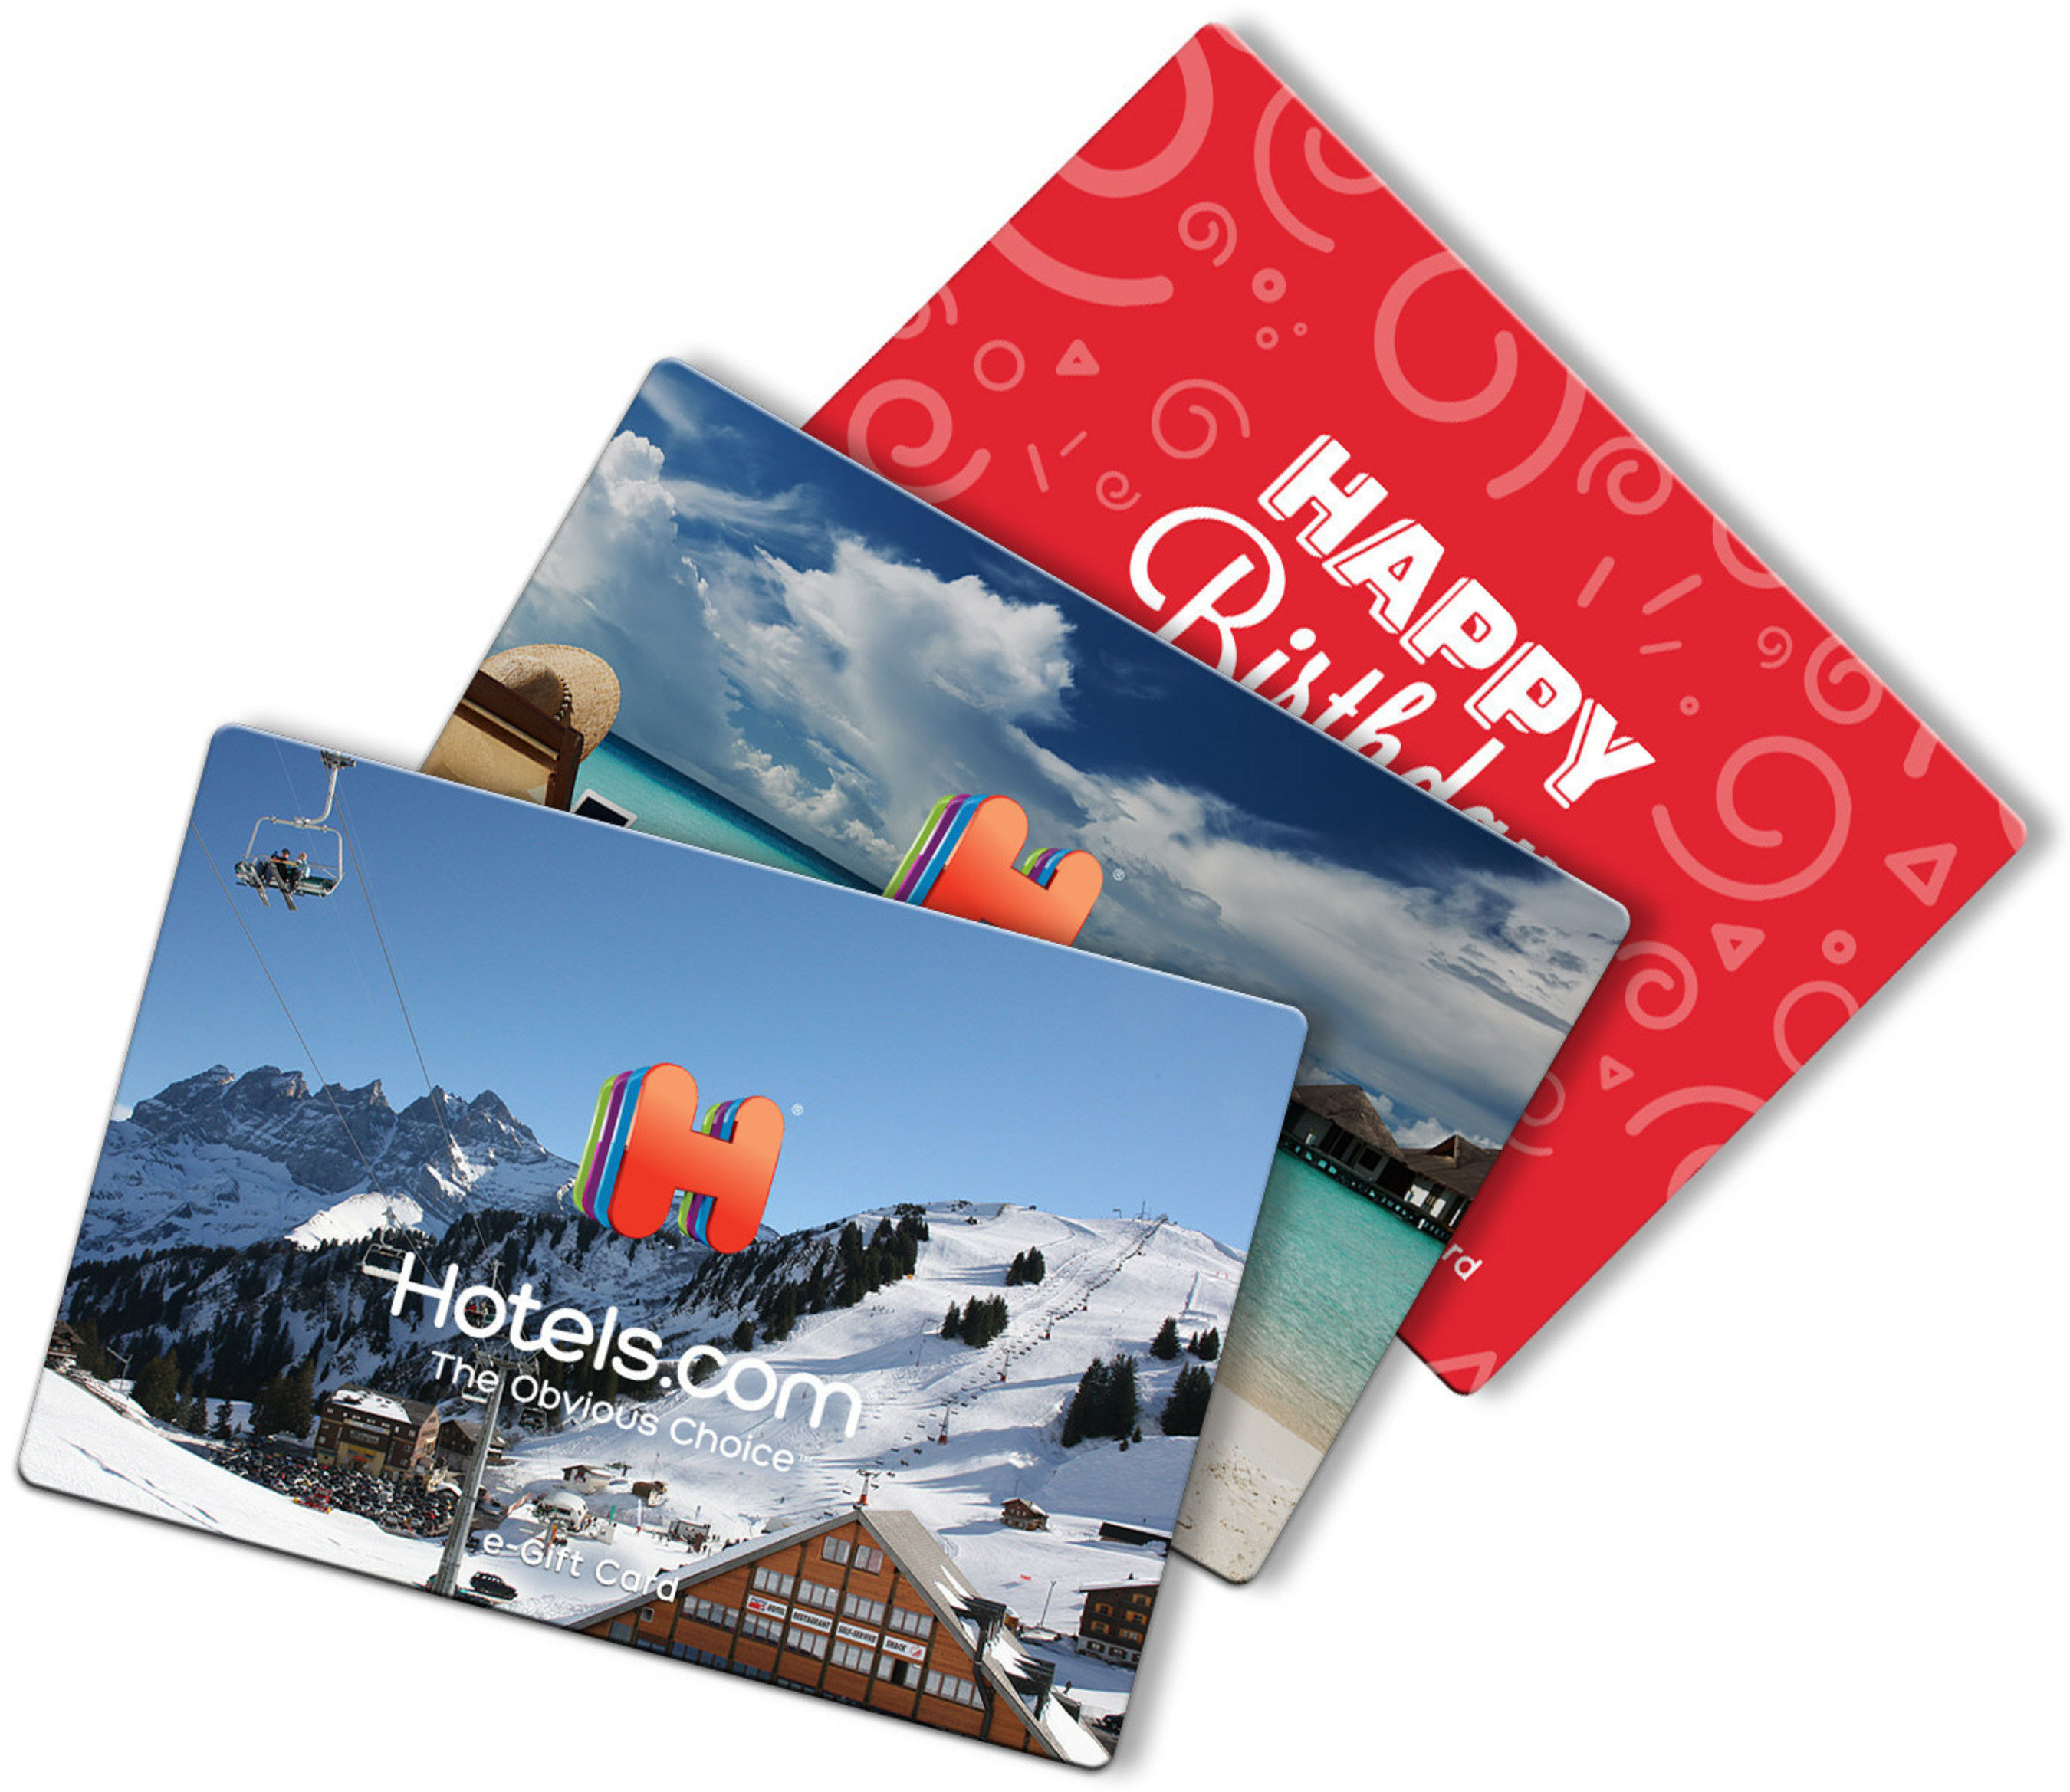 The Hotels.com Gift Card can be purchased as an instantly redeemable e-gift card or plastic card in values as low as $10 at www.hotels.com/giftcards.